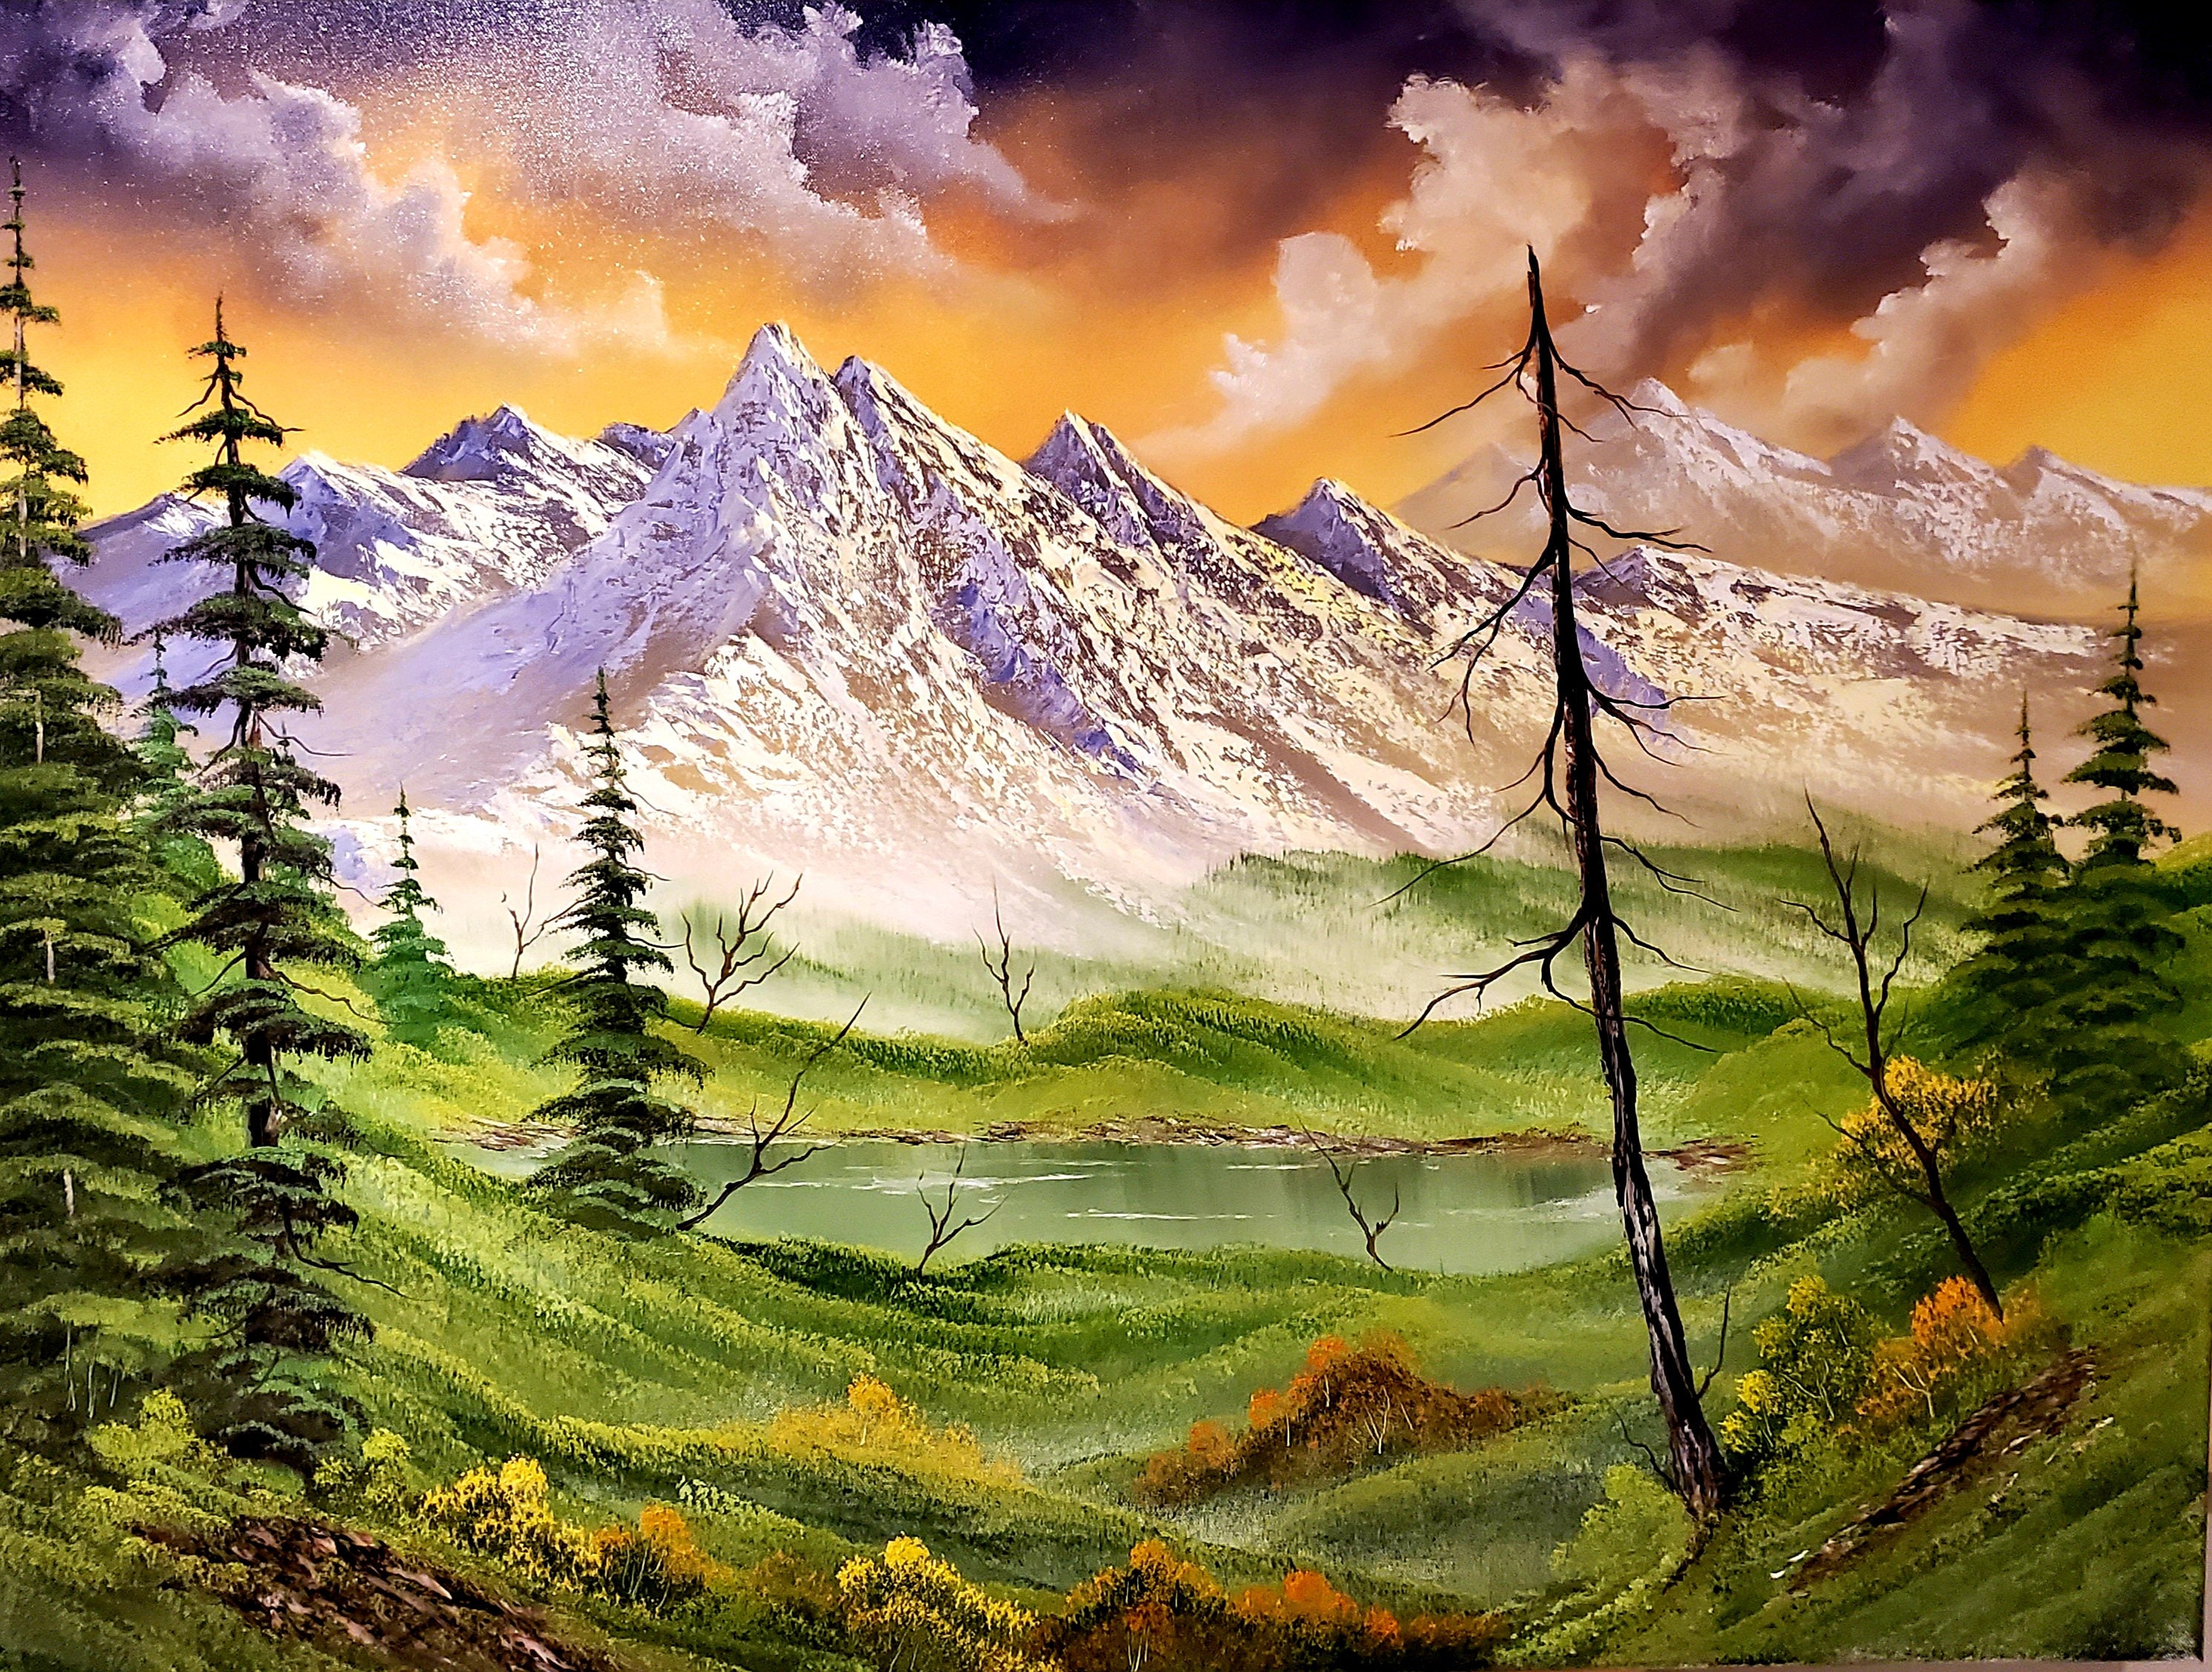 Bob Ross Style Original Painting mountain Meadows on 30x40 Inch Canvas 